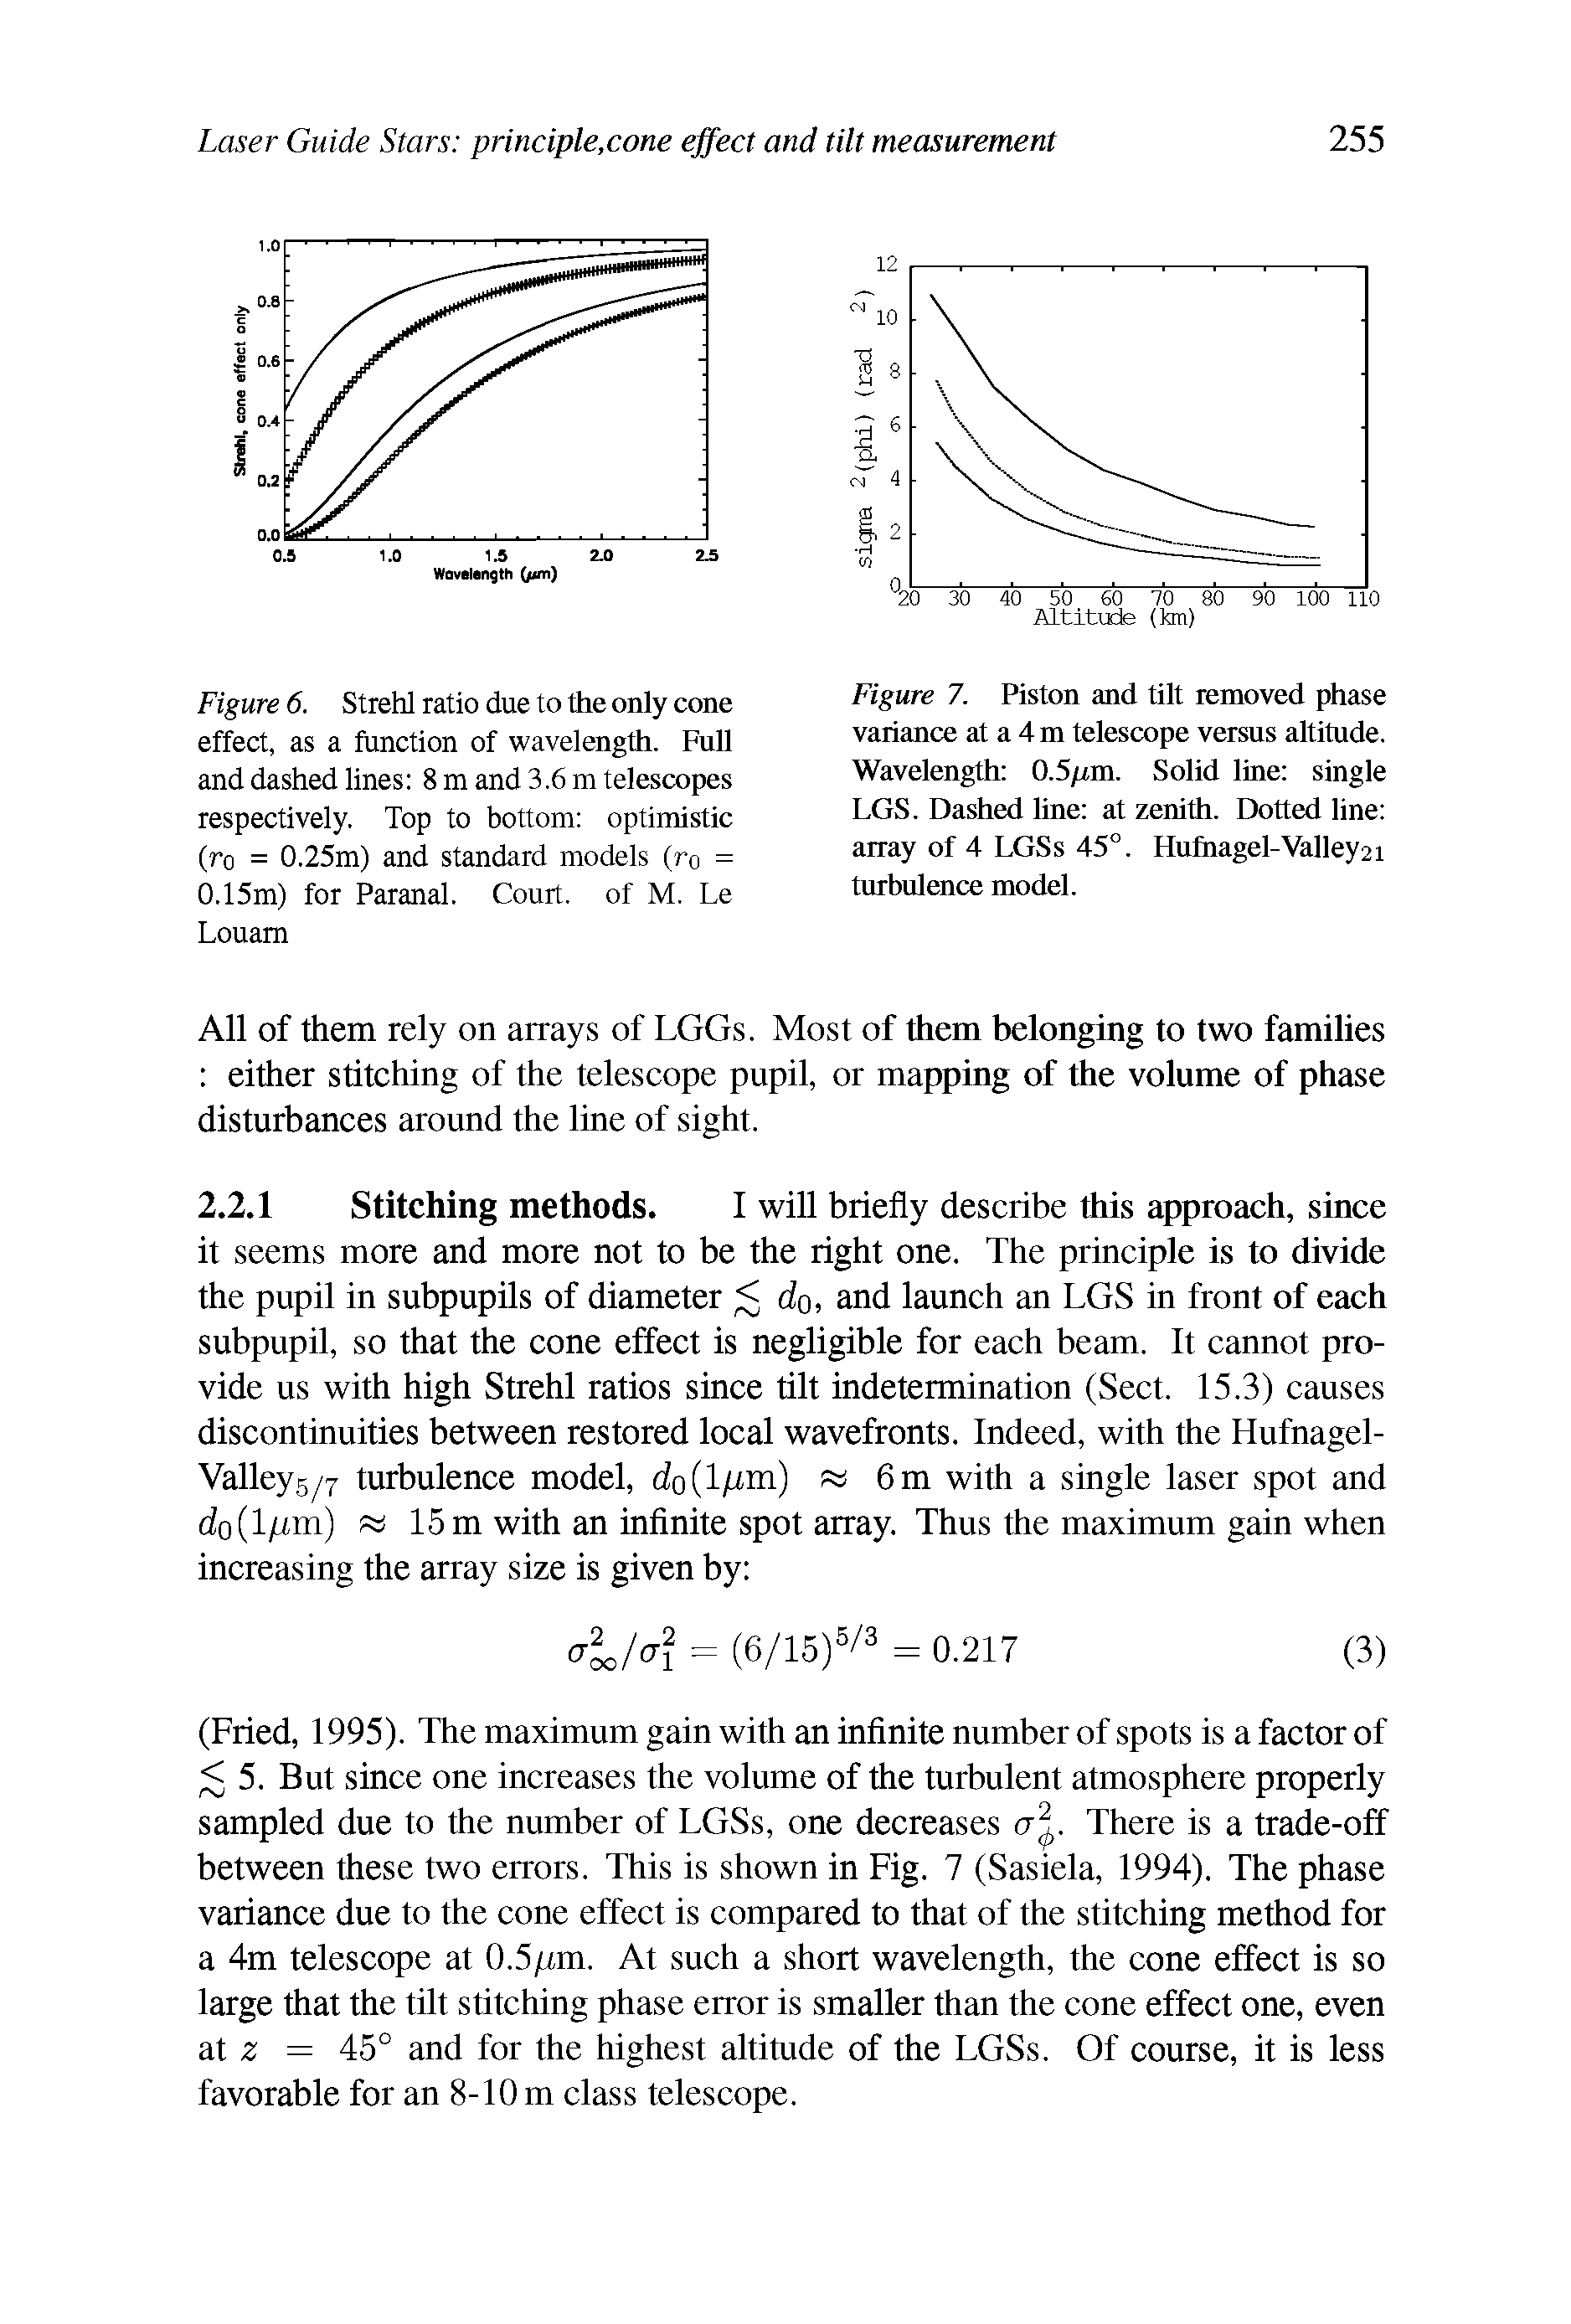 Figure 7. Piston and tilt removed phase variance at a 4 m telescope versus altitude. Wavelength O.Spm. Solid line single LGS. Dashed line at zenith. Dotted line array of 4 LGSs 45°. Hufnagel-Valley21 turbulence model.